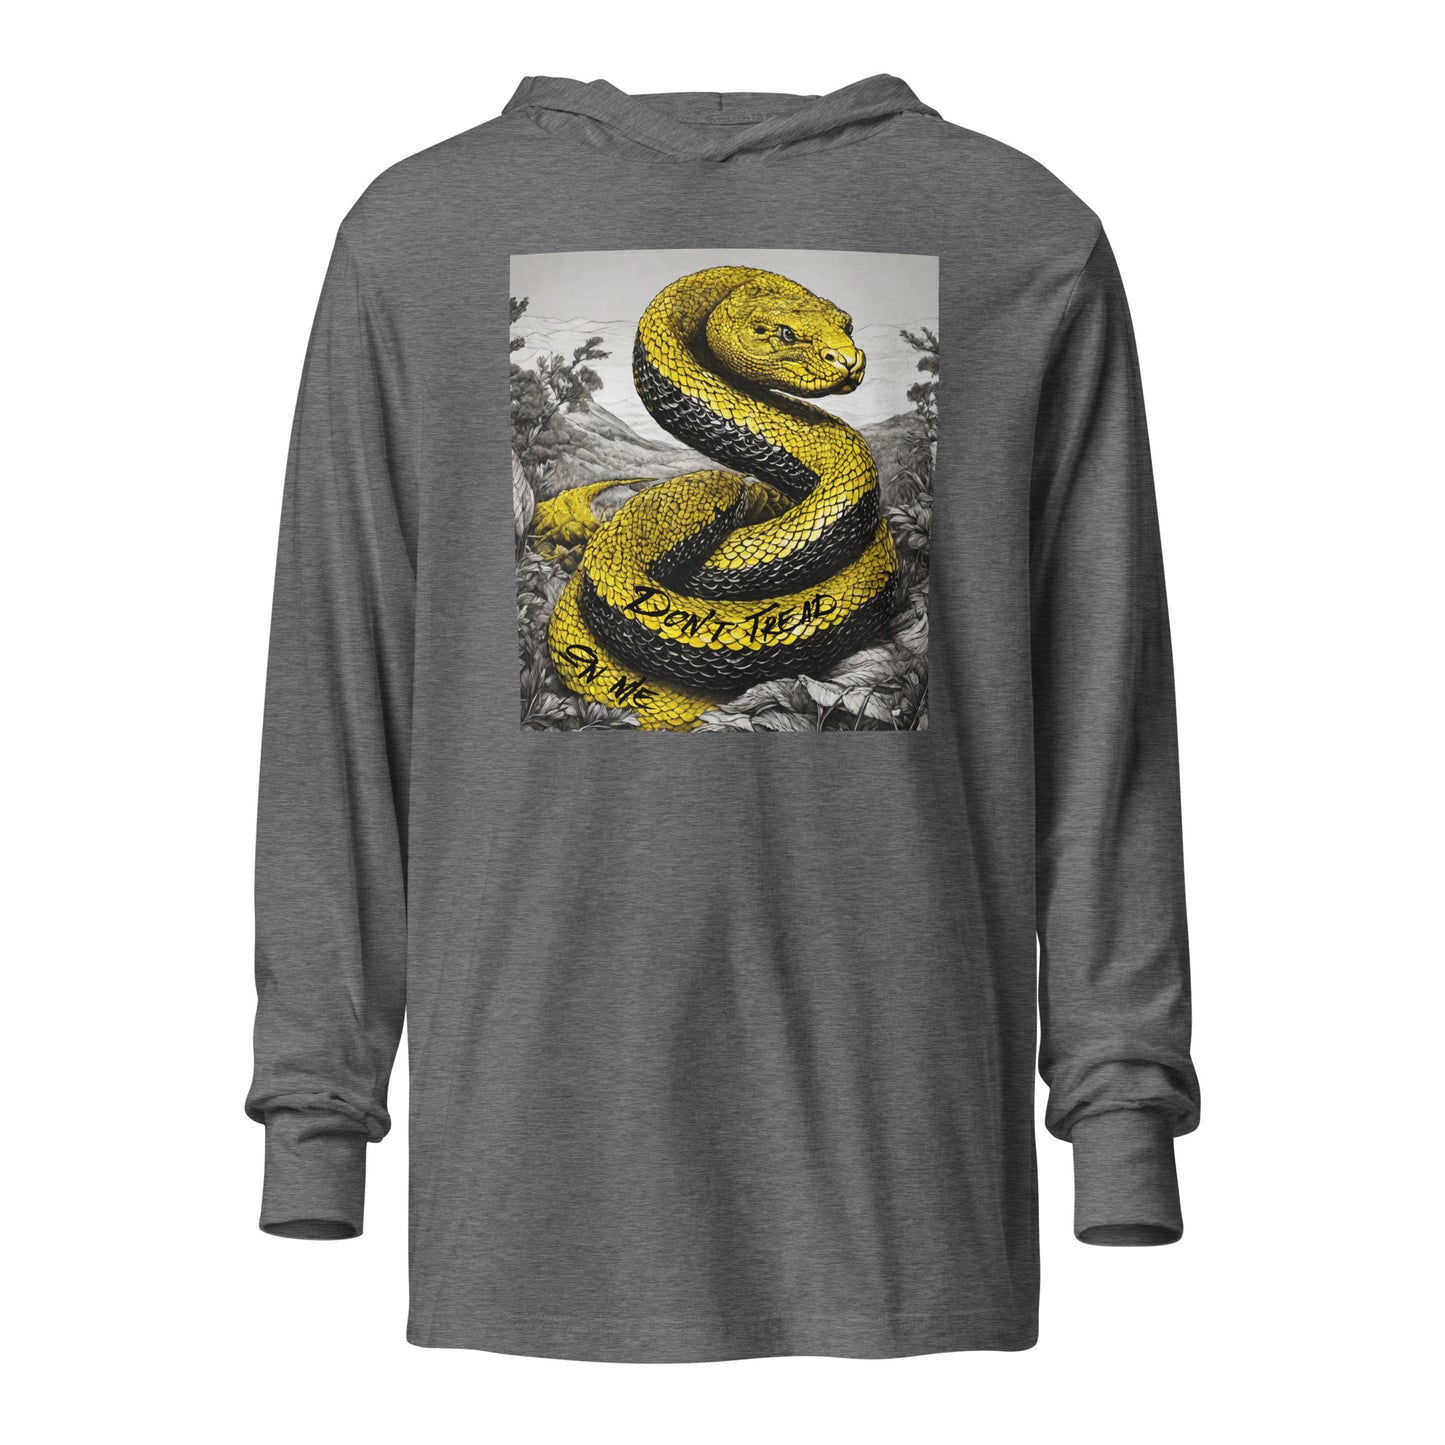 Don't Tread On Me Hooded Long-Sleeve Tee Grey Triblend